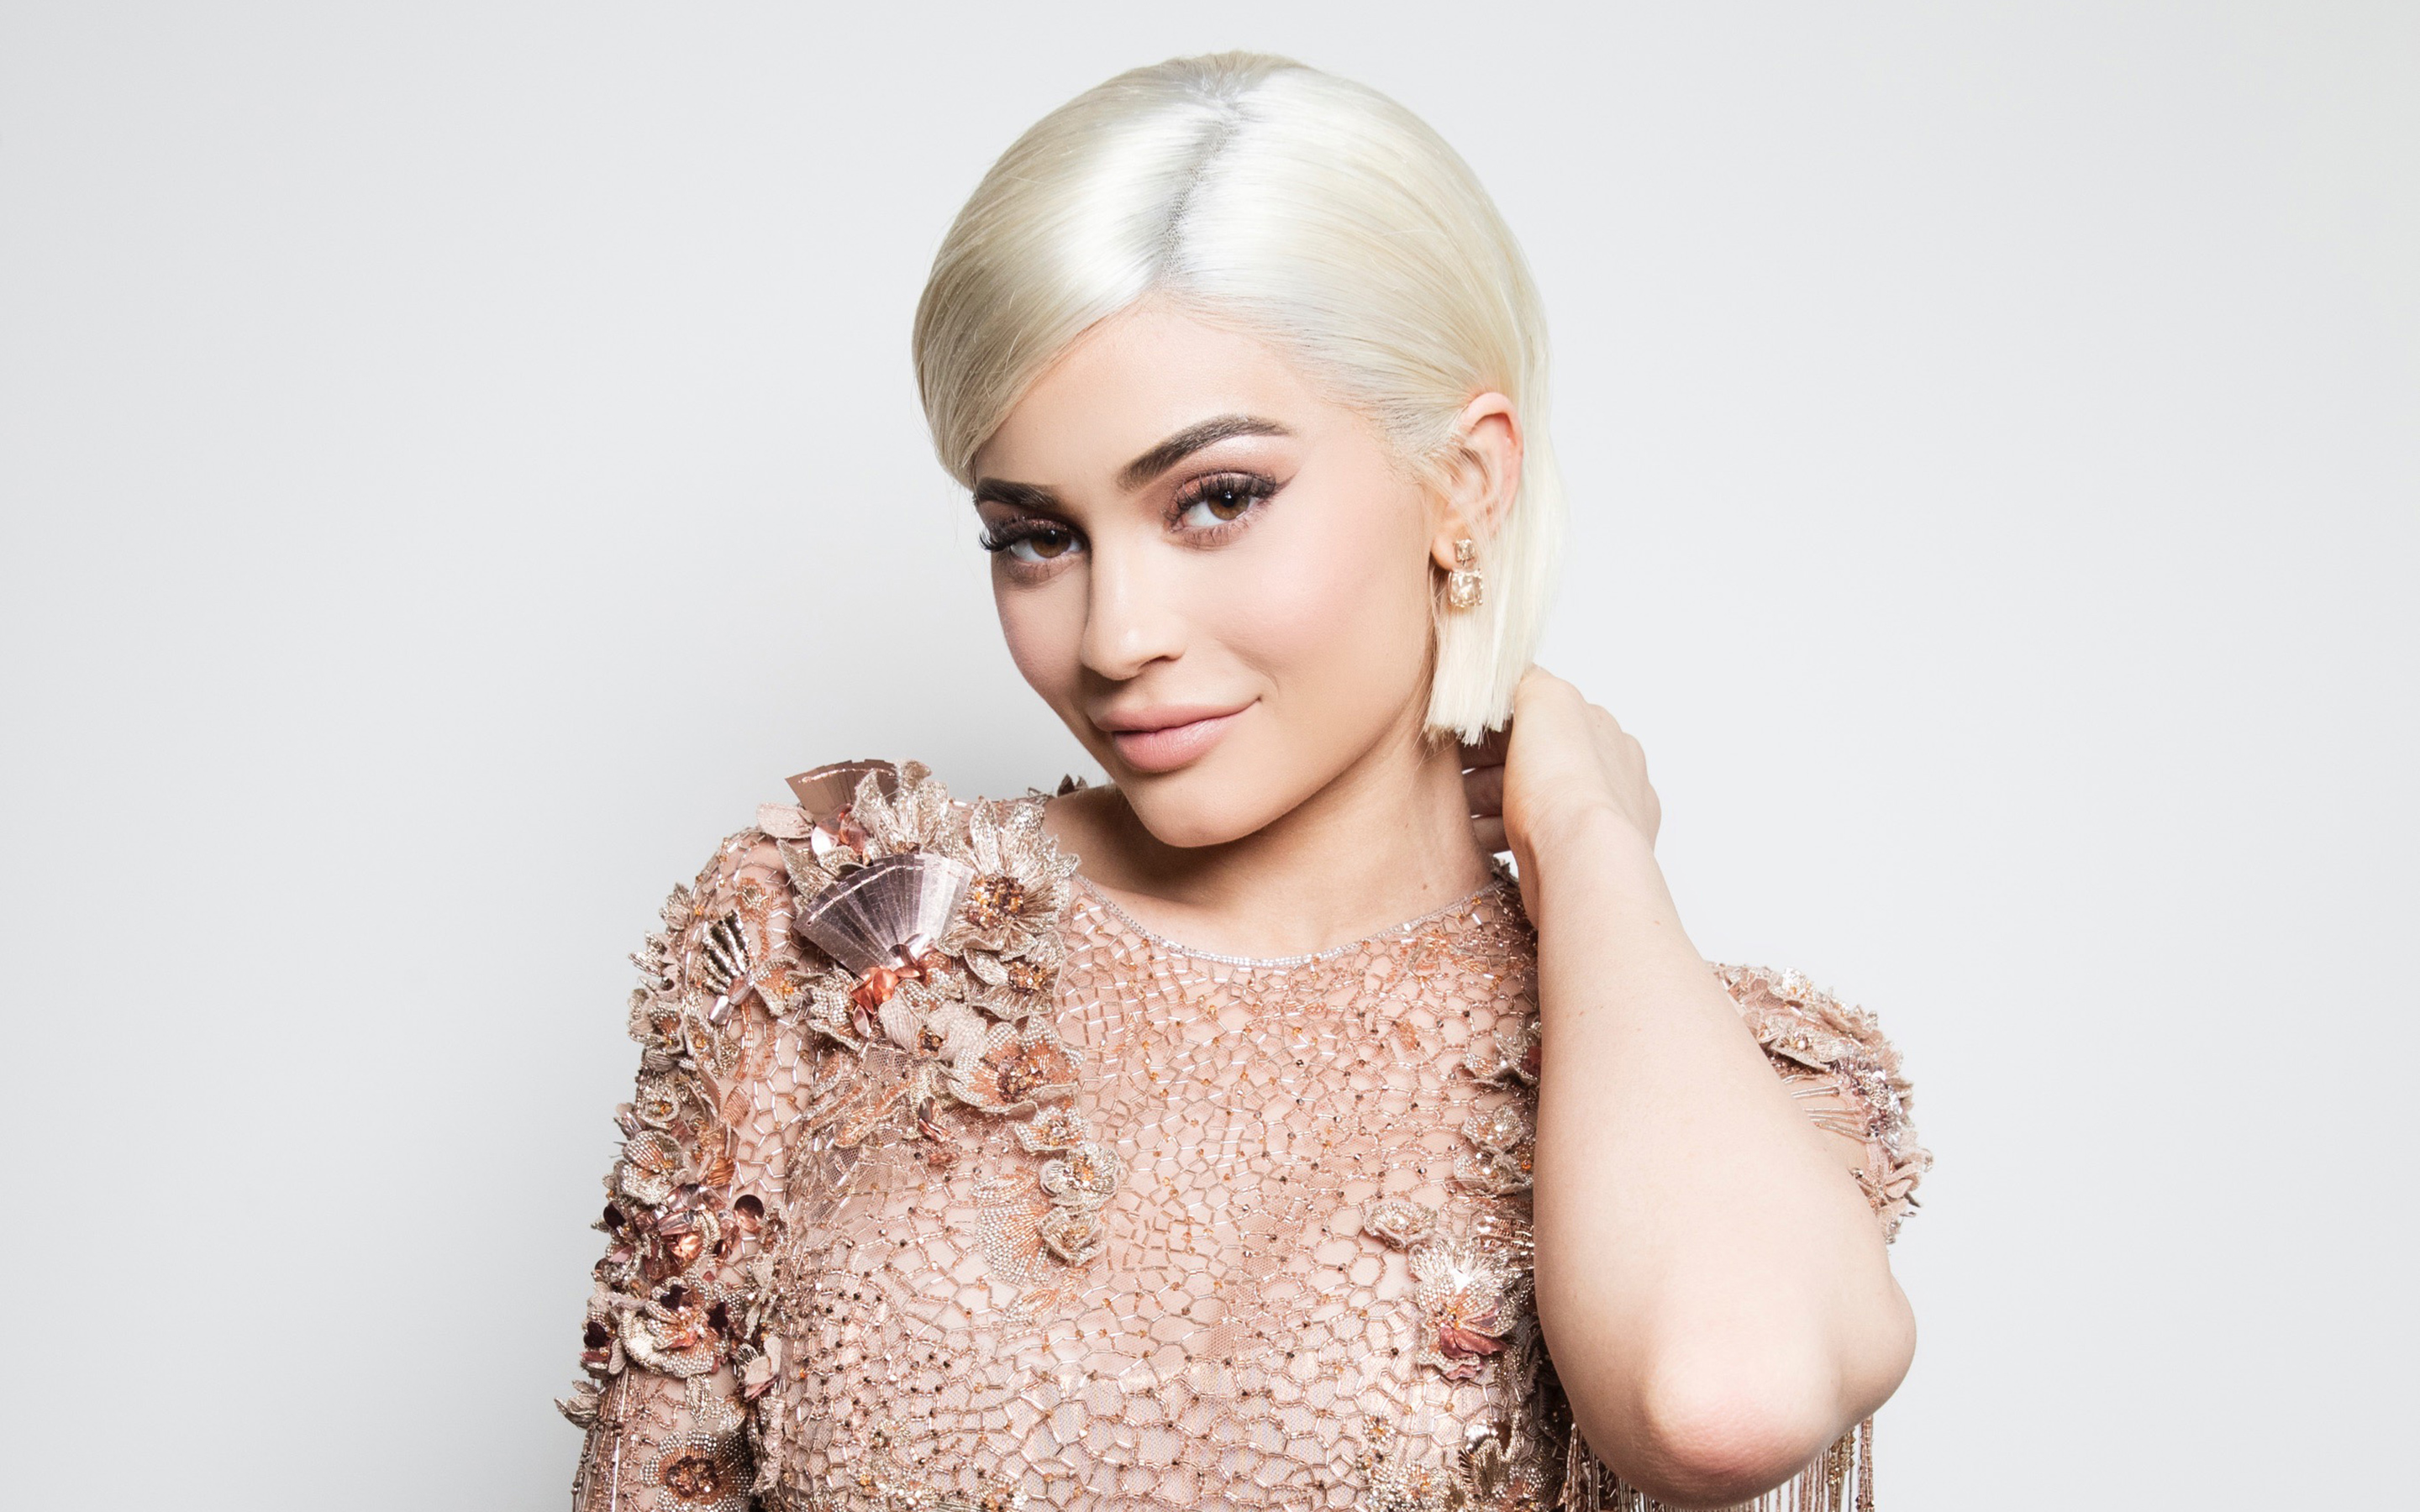 Kylie Jenner Hd Wallpapers Hd Wallpapers